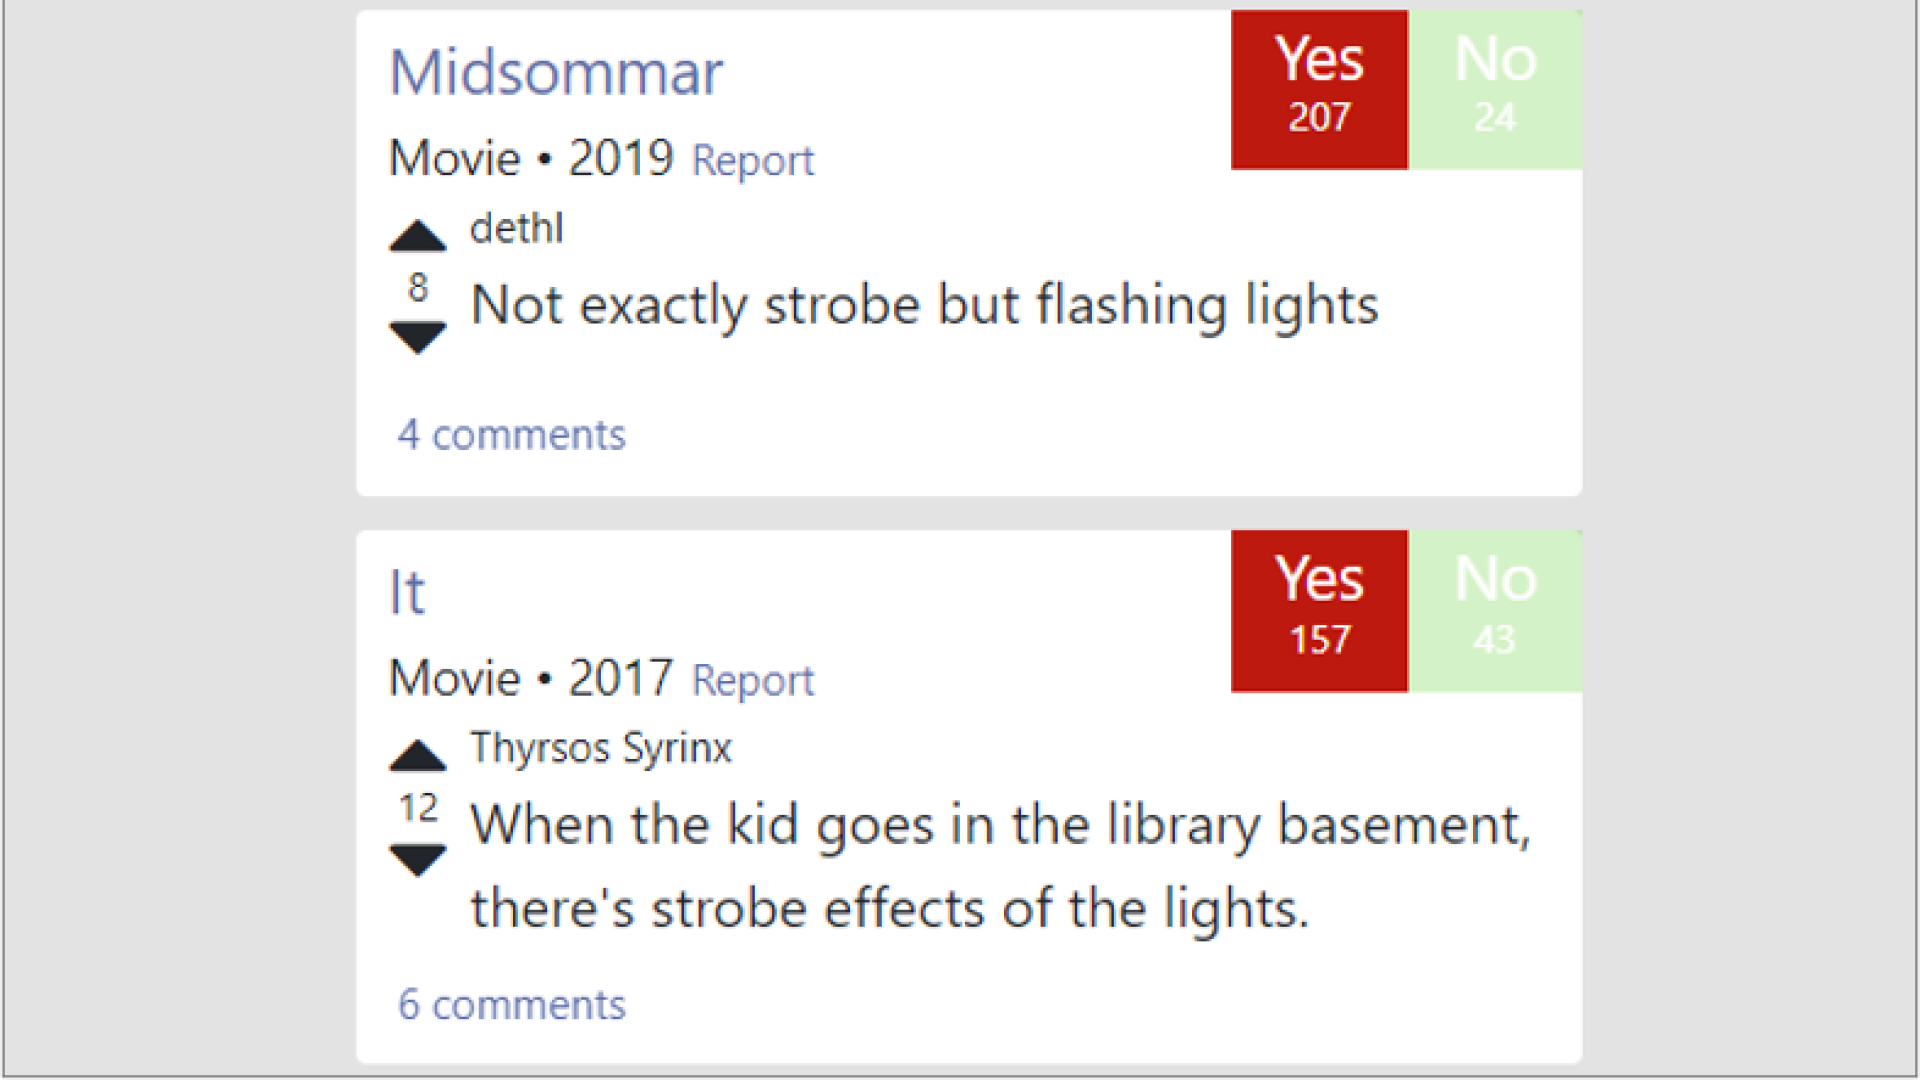 Two examples of crowdsourced warnings about flashing lights are shown. The first is for the film Midsommar and says "Not exactly strobe but flashing lights". The second is for the film It and says "When the kid goes into the library basement, there's strobe effects of the lights."